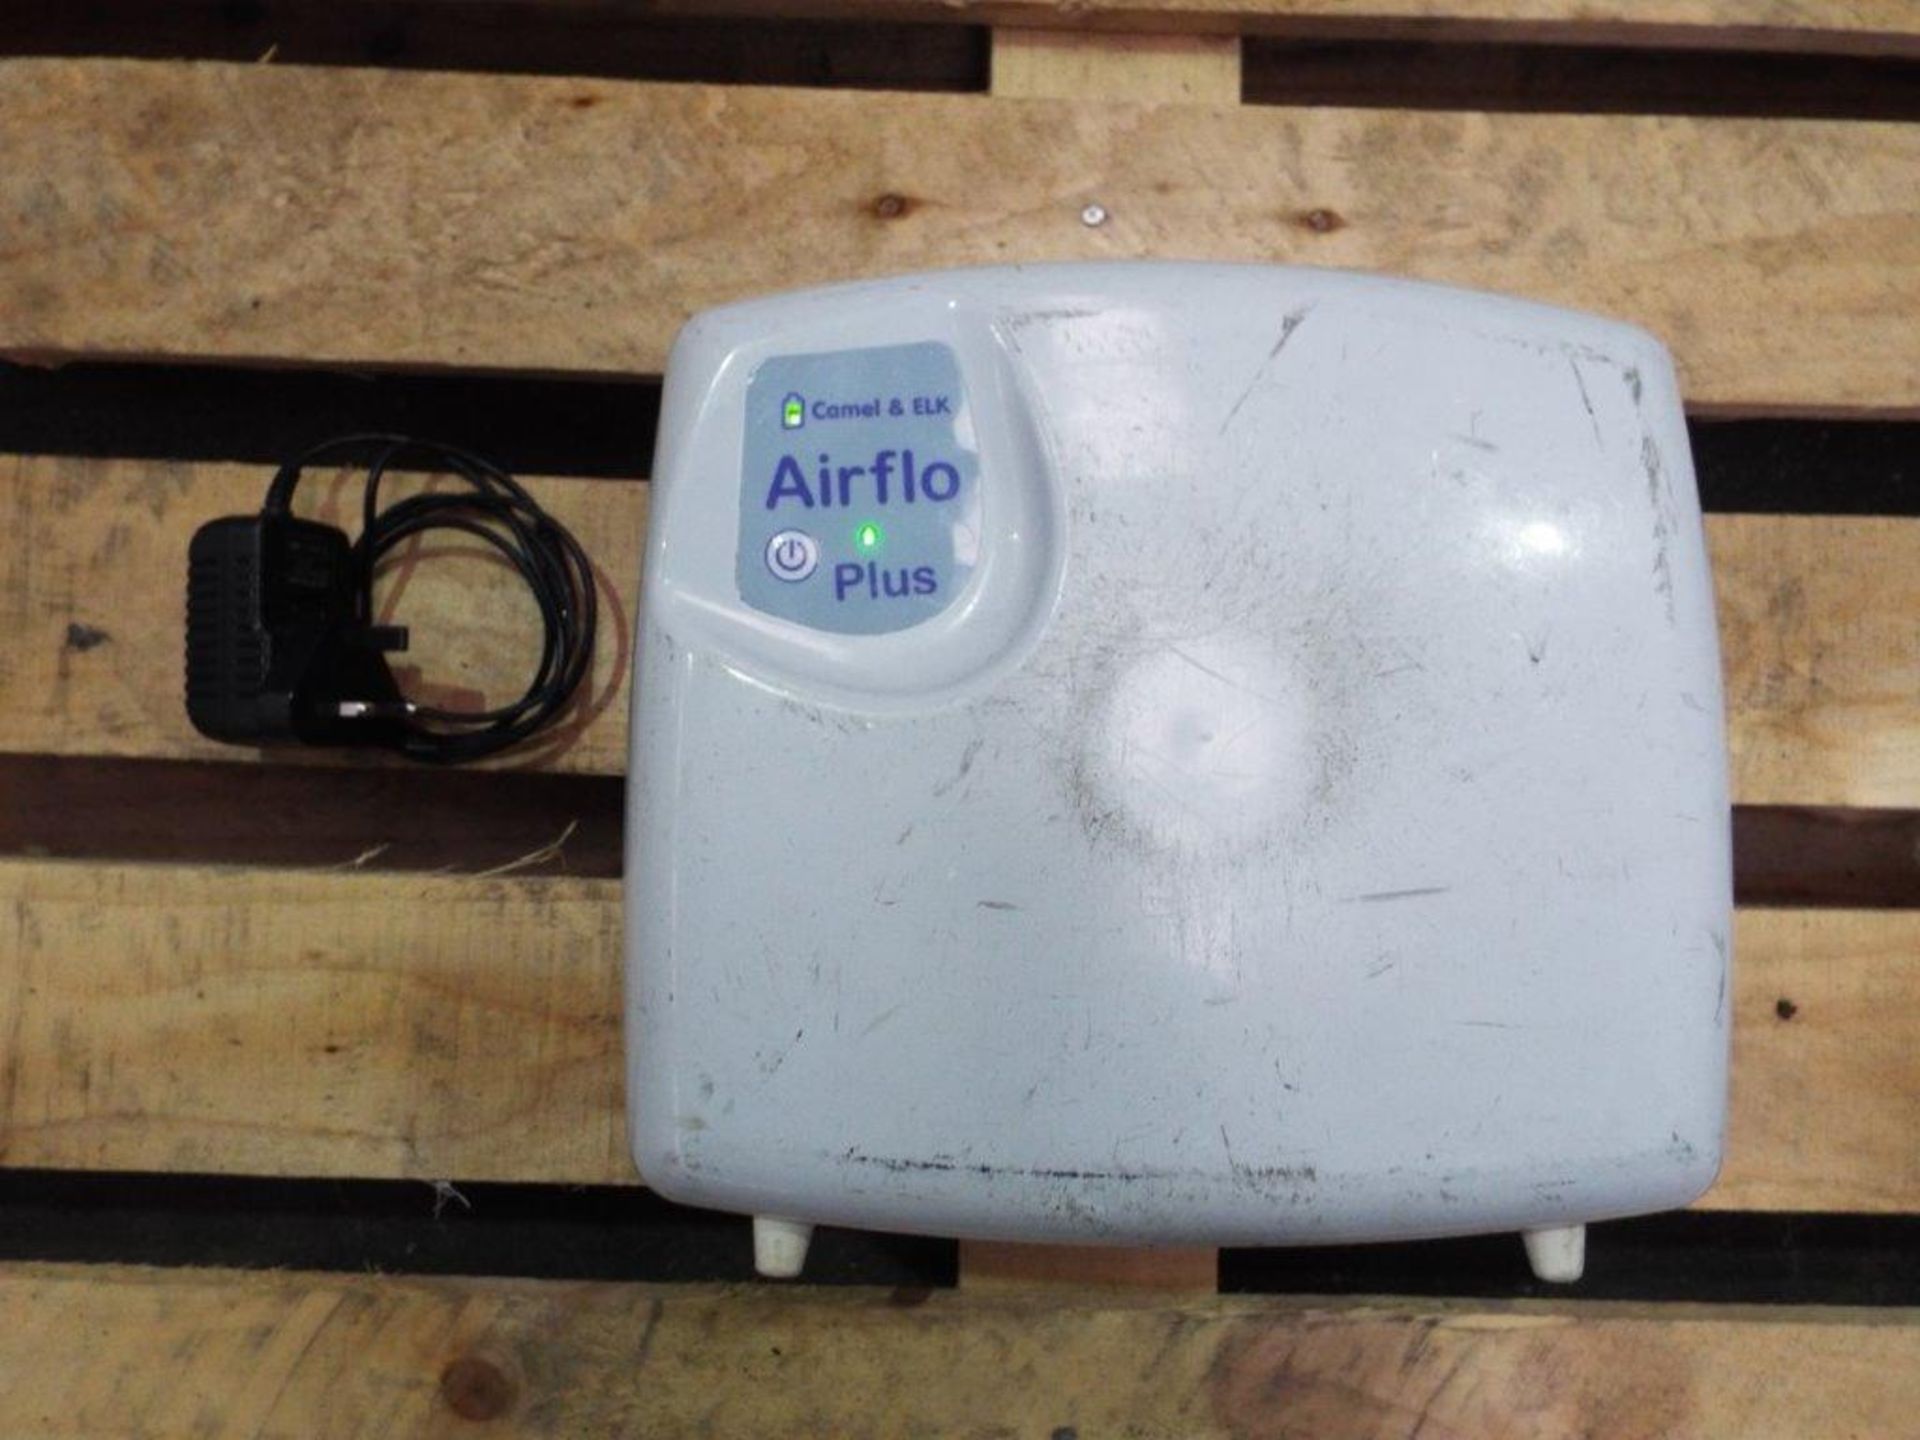 2 x Airflo Plus Portable Compressor for use with Camel/Elk Emergency Lifting Cushions - Image 3 of 9